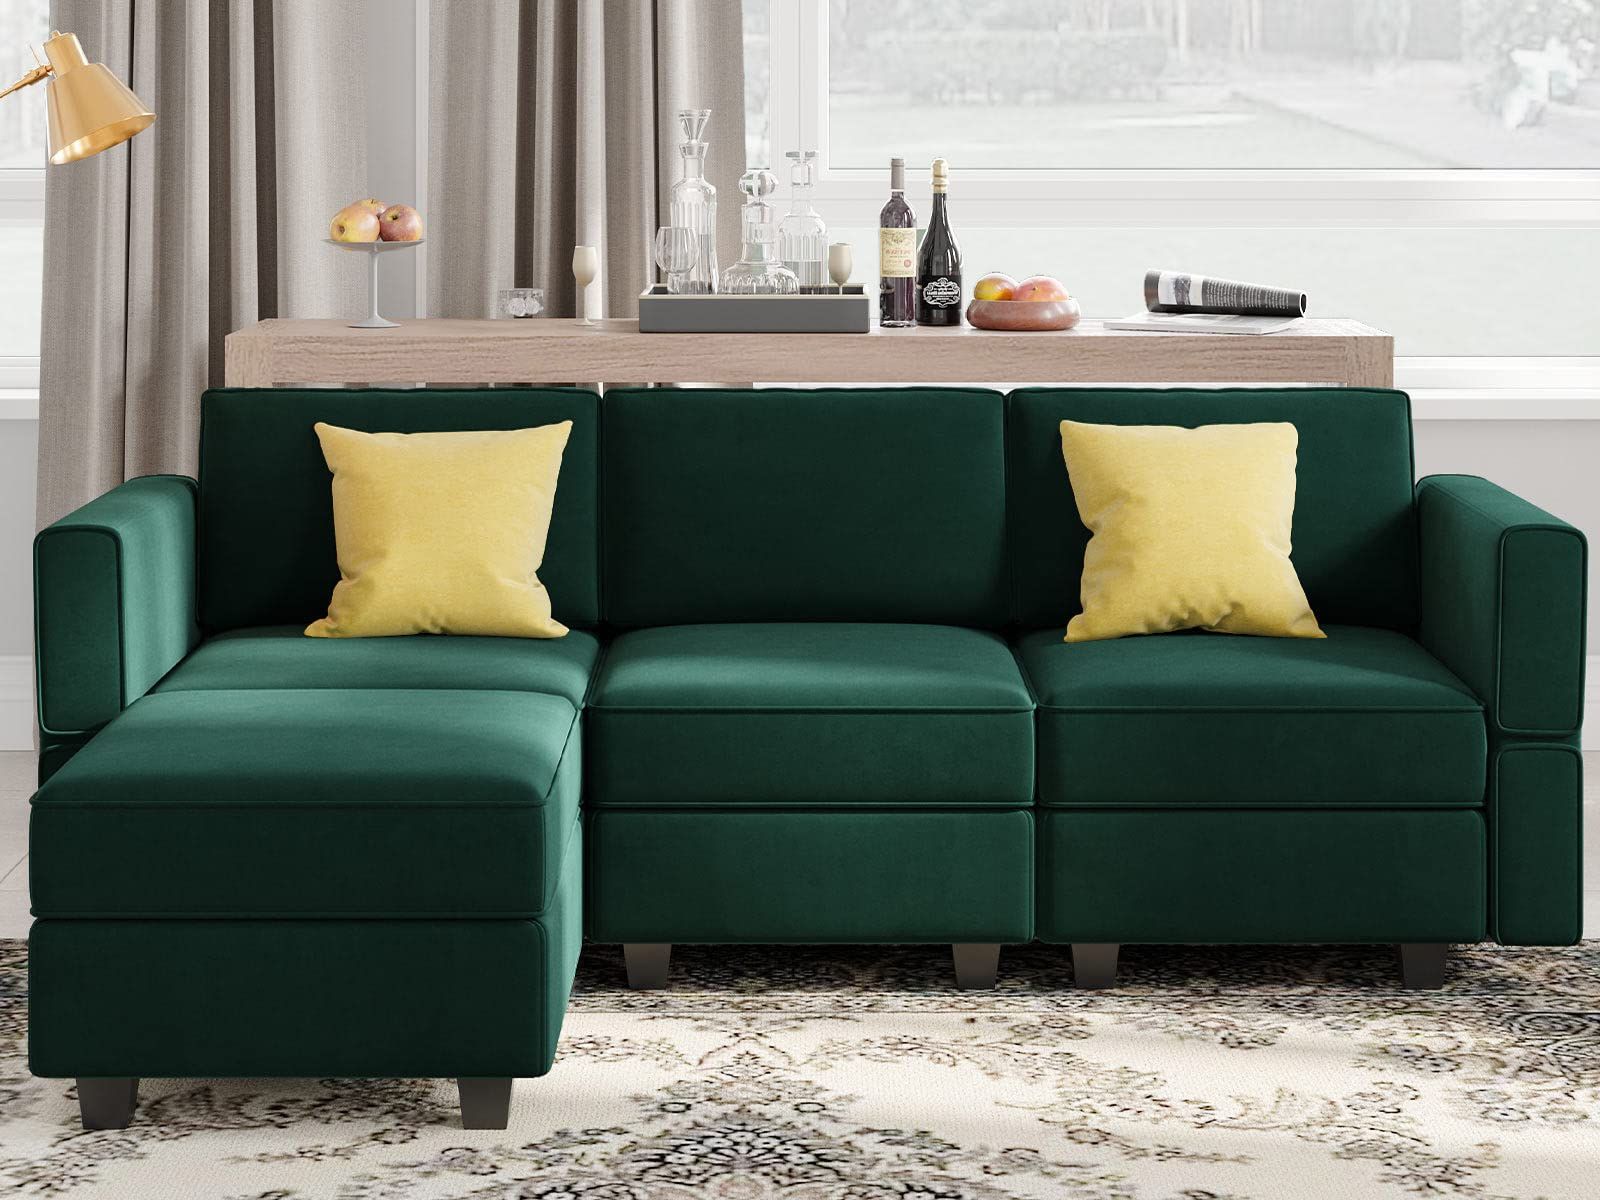 Buy Belffin Convertible Sectional Sofa With Chaise Velvet L Shaped Sofa For Latest Green Velvet Modular Sectionals (View 12 of 15)